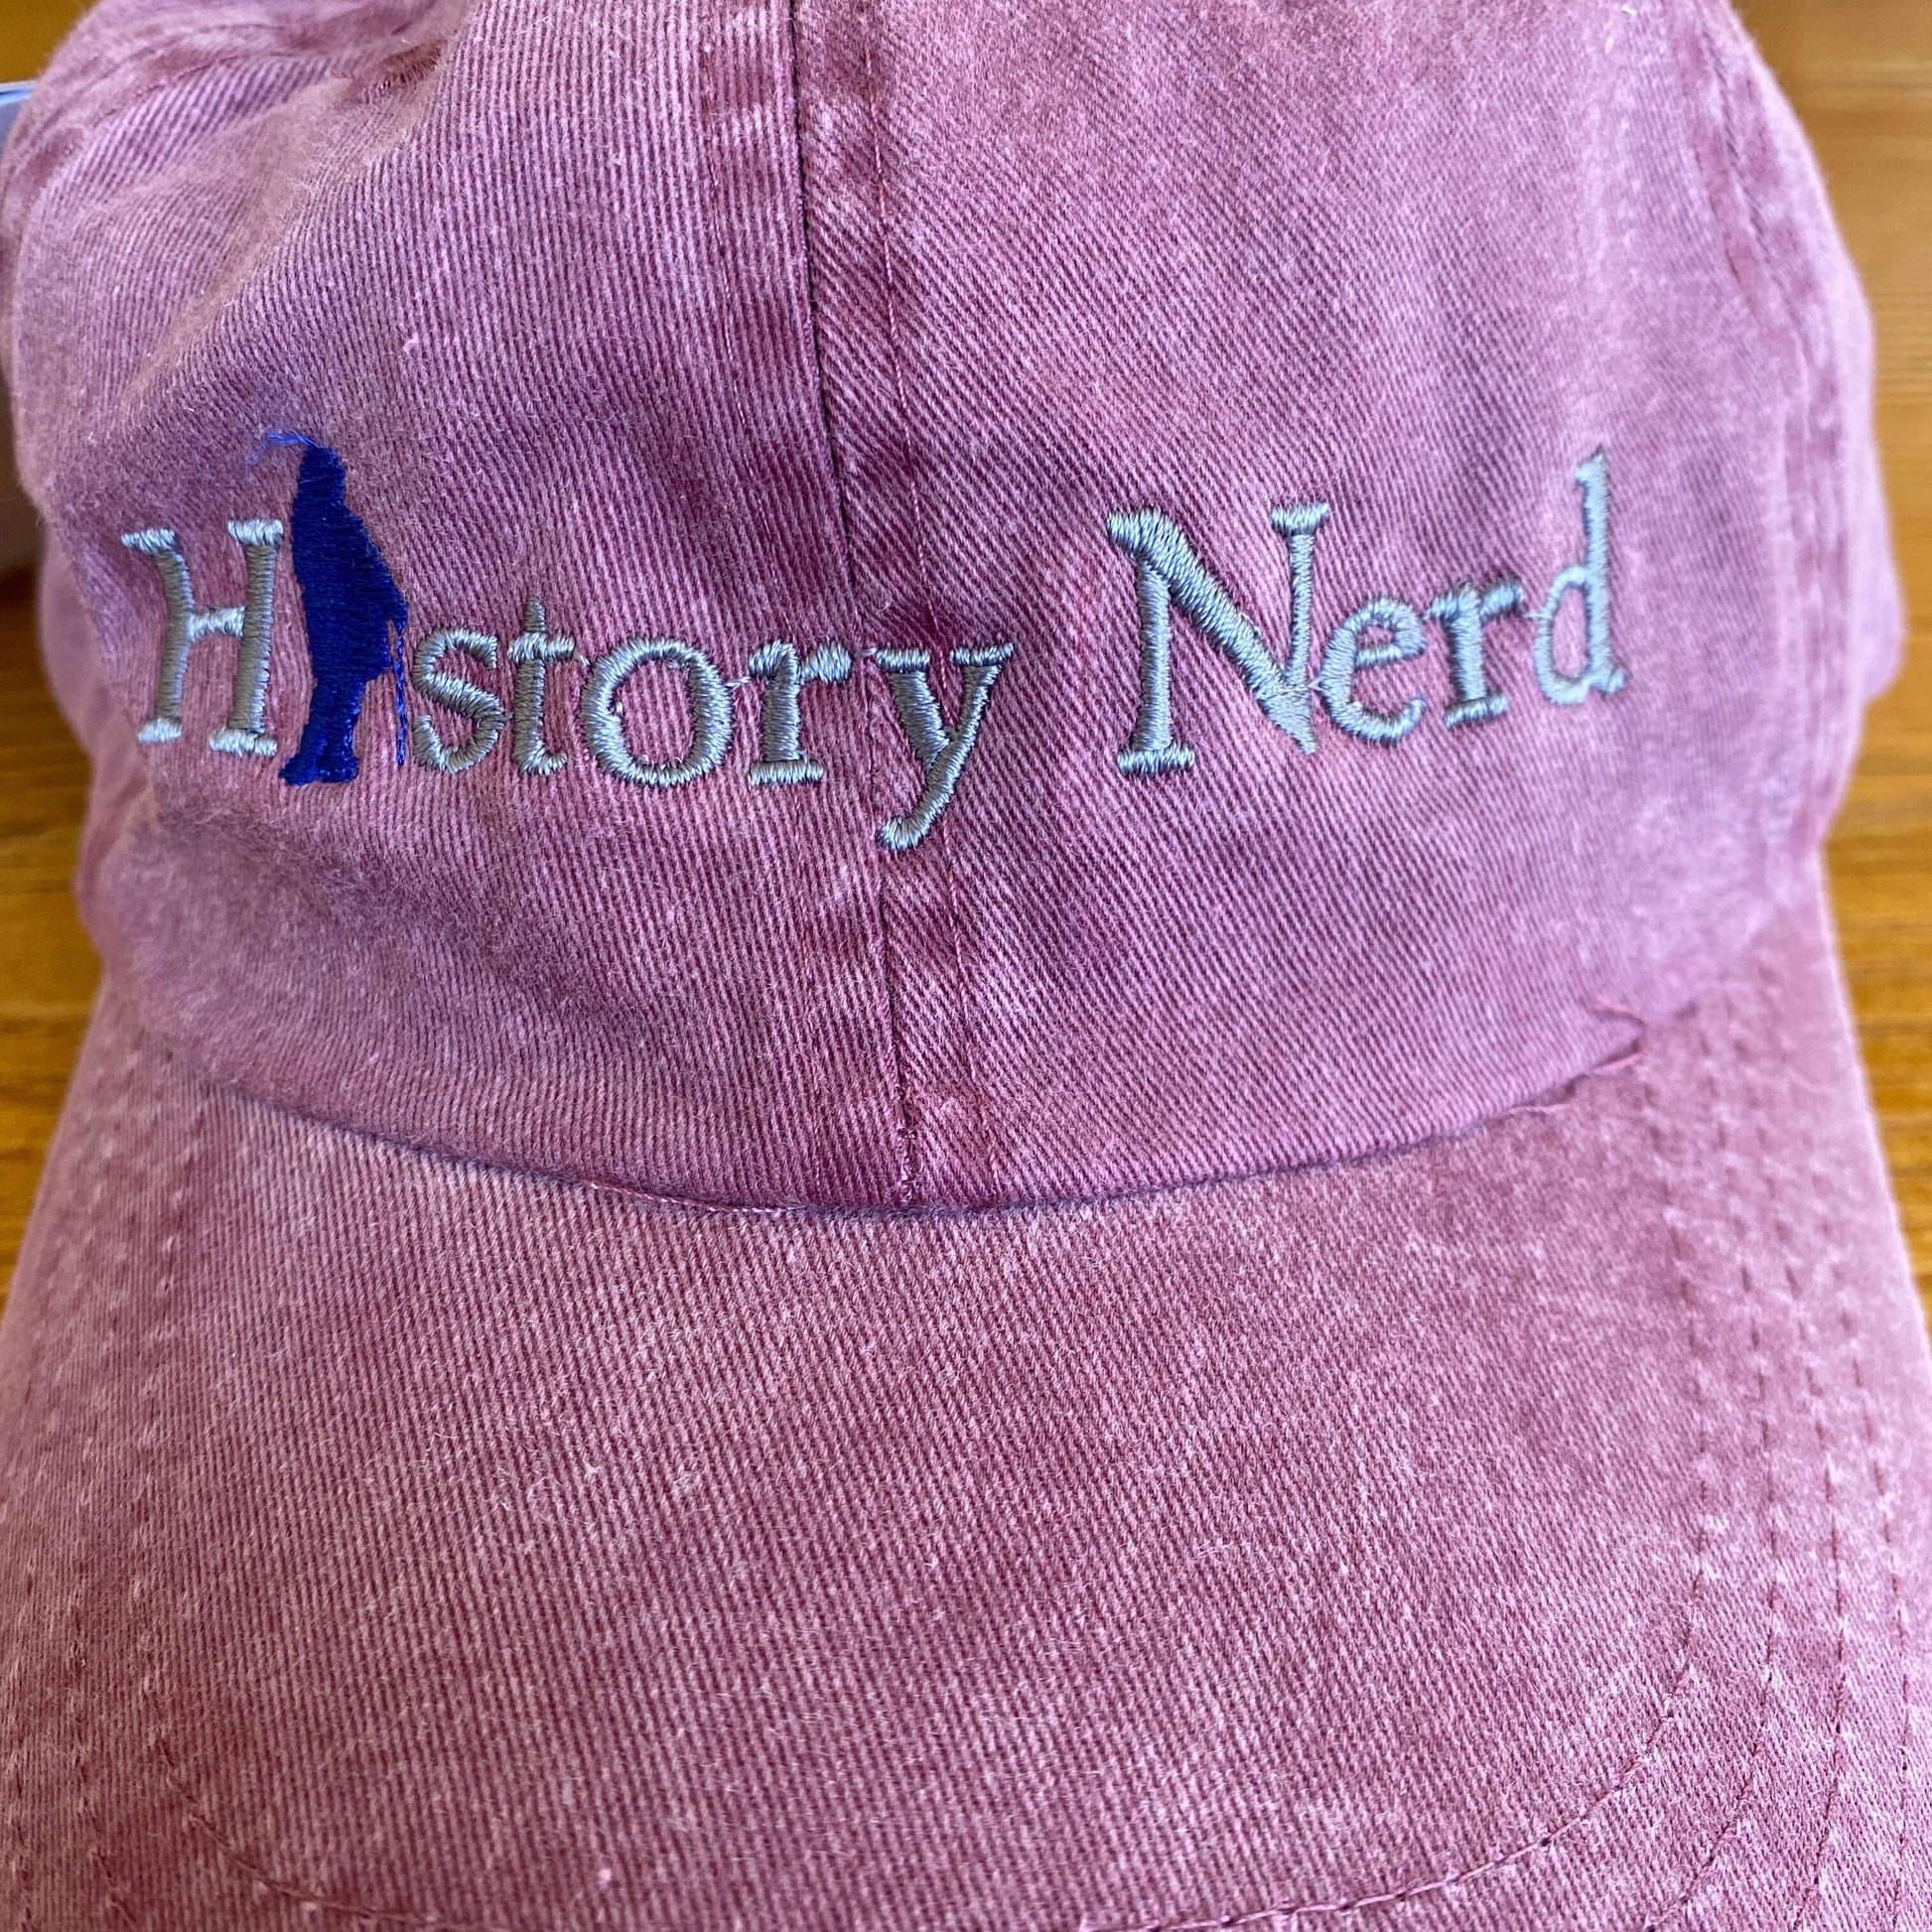 Close-up of the Embroidered "History Nerd" with Ben Franklin cap - Maroon from The History List Store